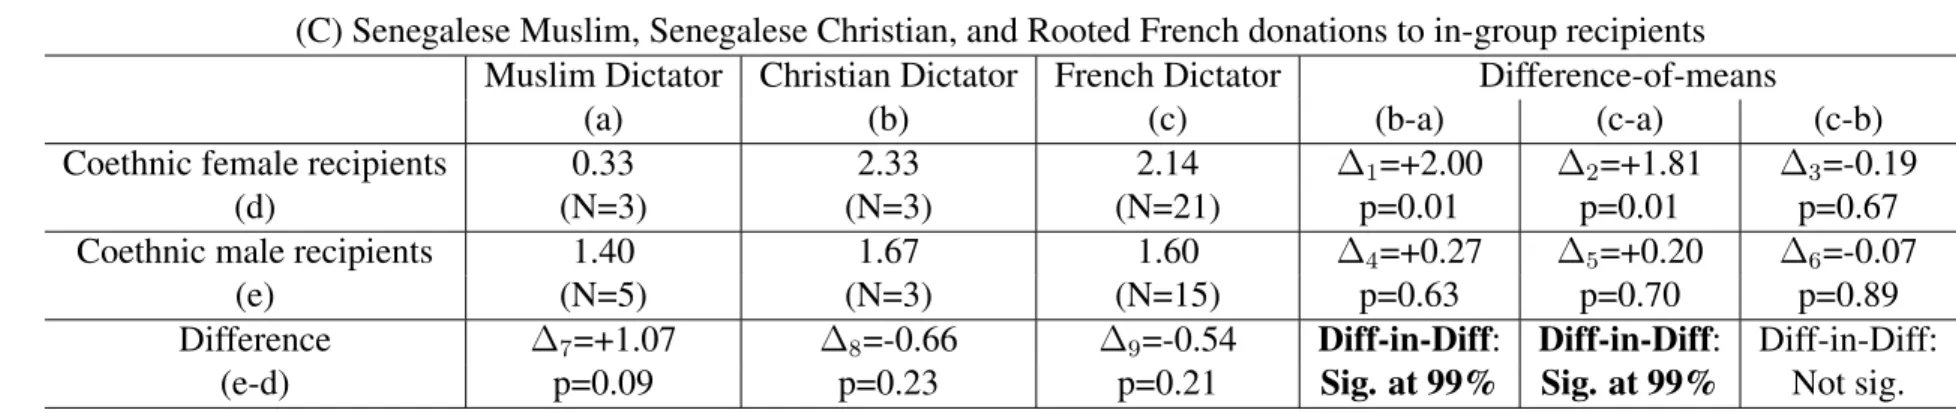 Table 3: Female dictator donations, difference-of-means analysis